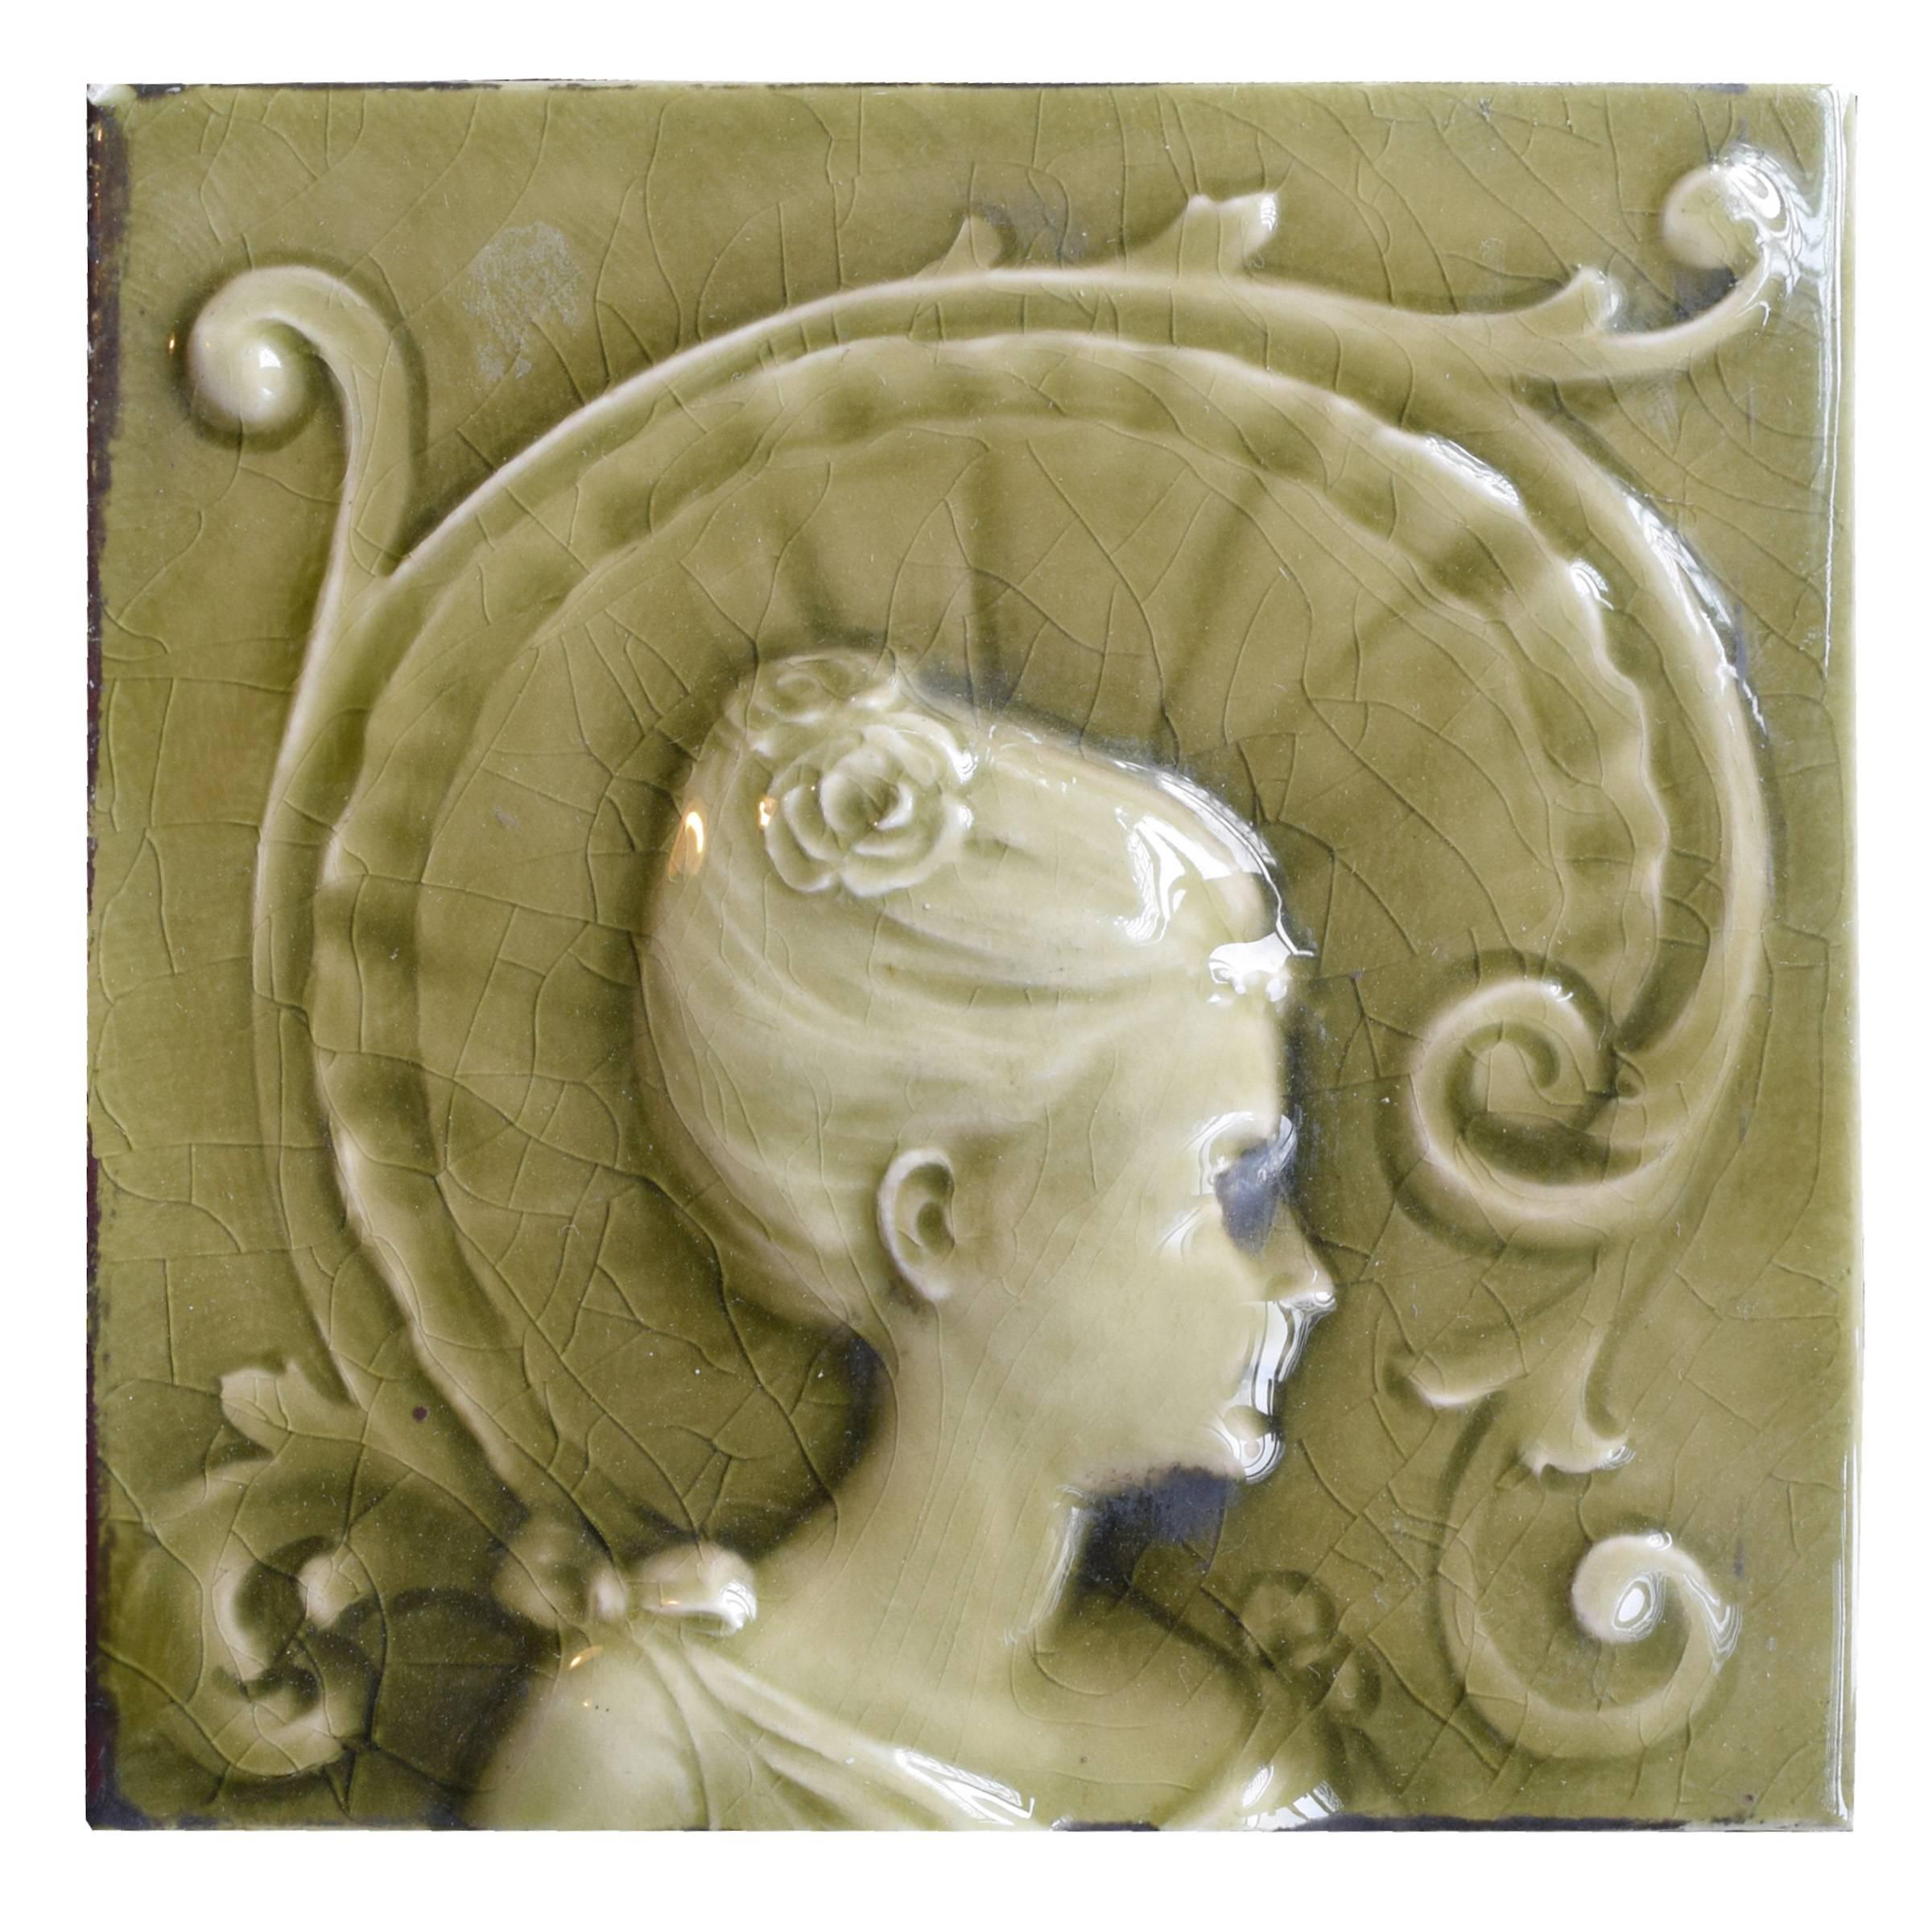 A fabulous three-piece glazed tile set depicting a woman in 18th century costume in low relief by the American Encaustic Tiling of Zanesville, OH. Stamped “A.E. Tile Co. Limited”, late 19th century. The American Encaustic Tiling (1875-1935) was, at